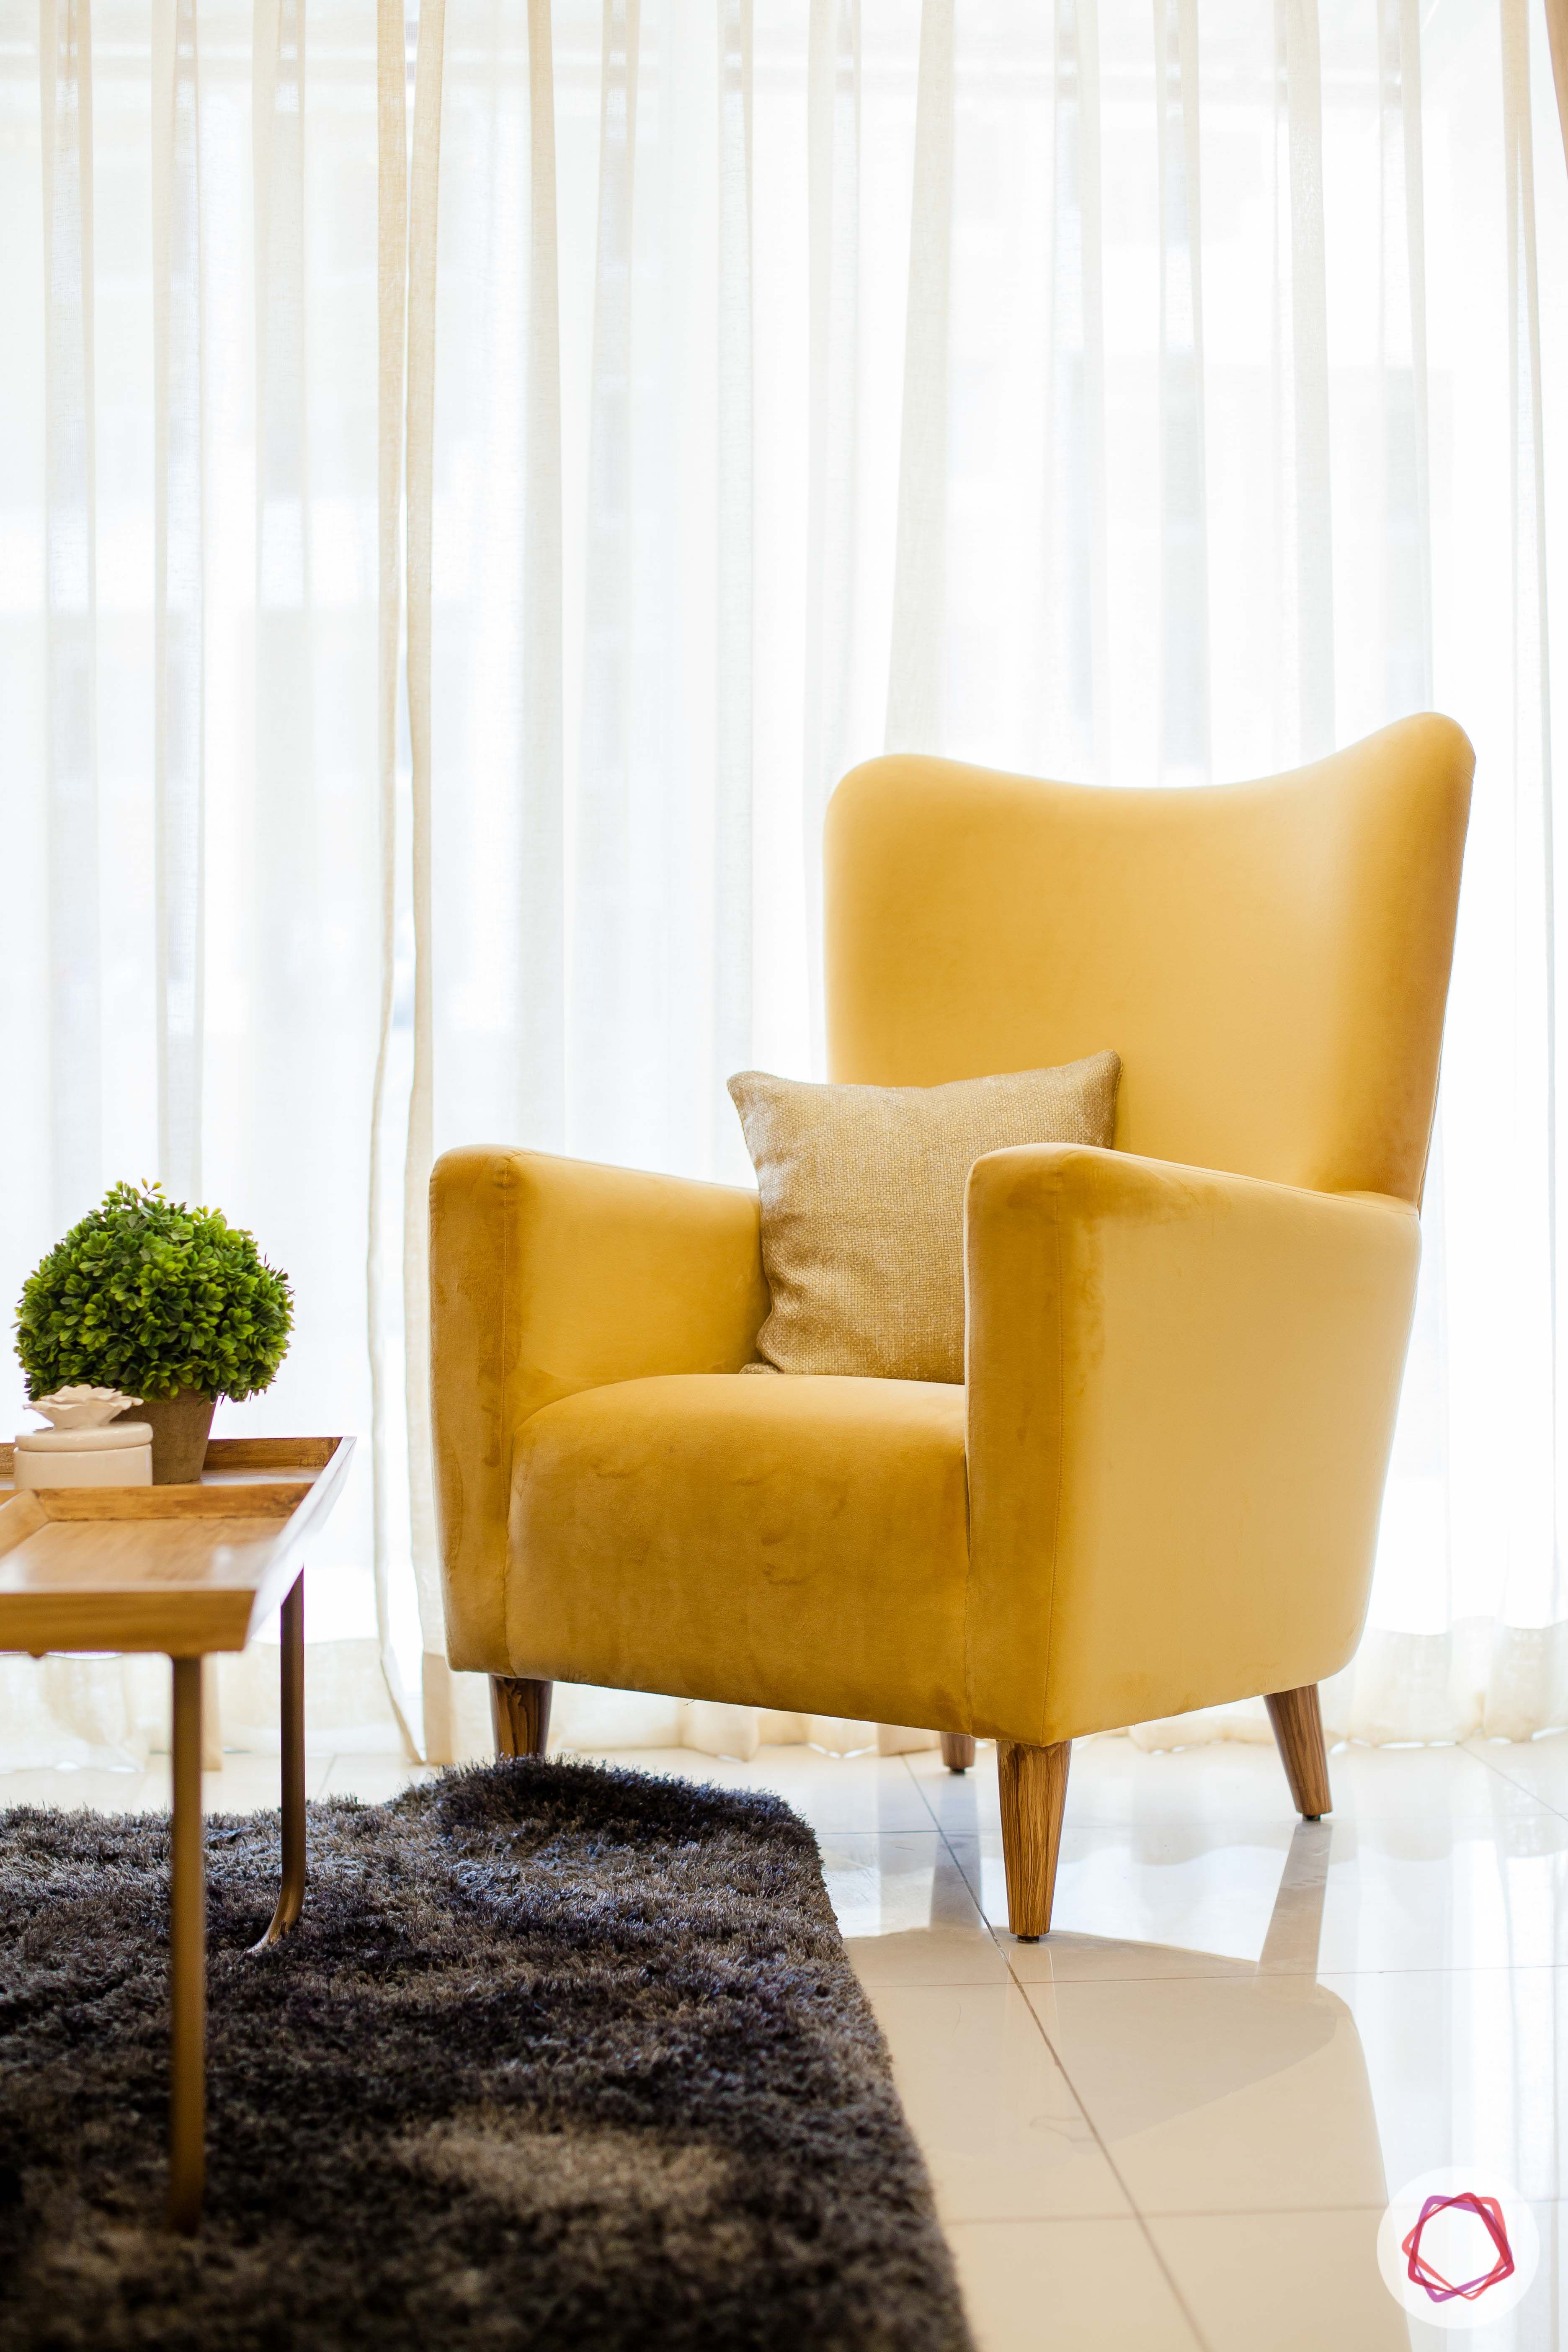 2bhk pune-yellow accent chair-indoor plant